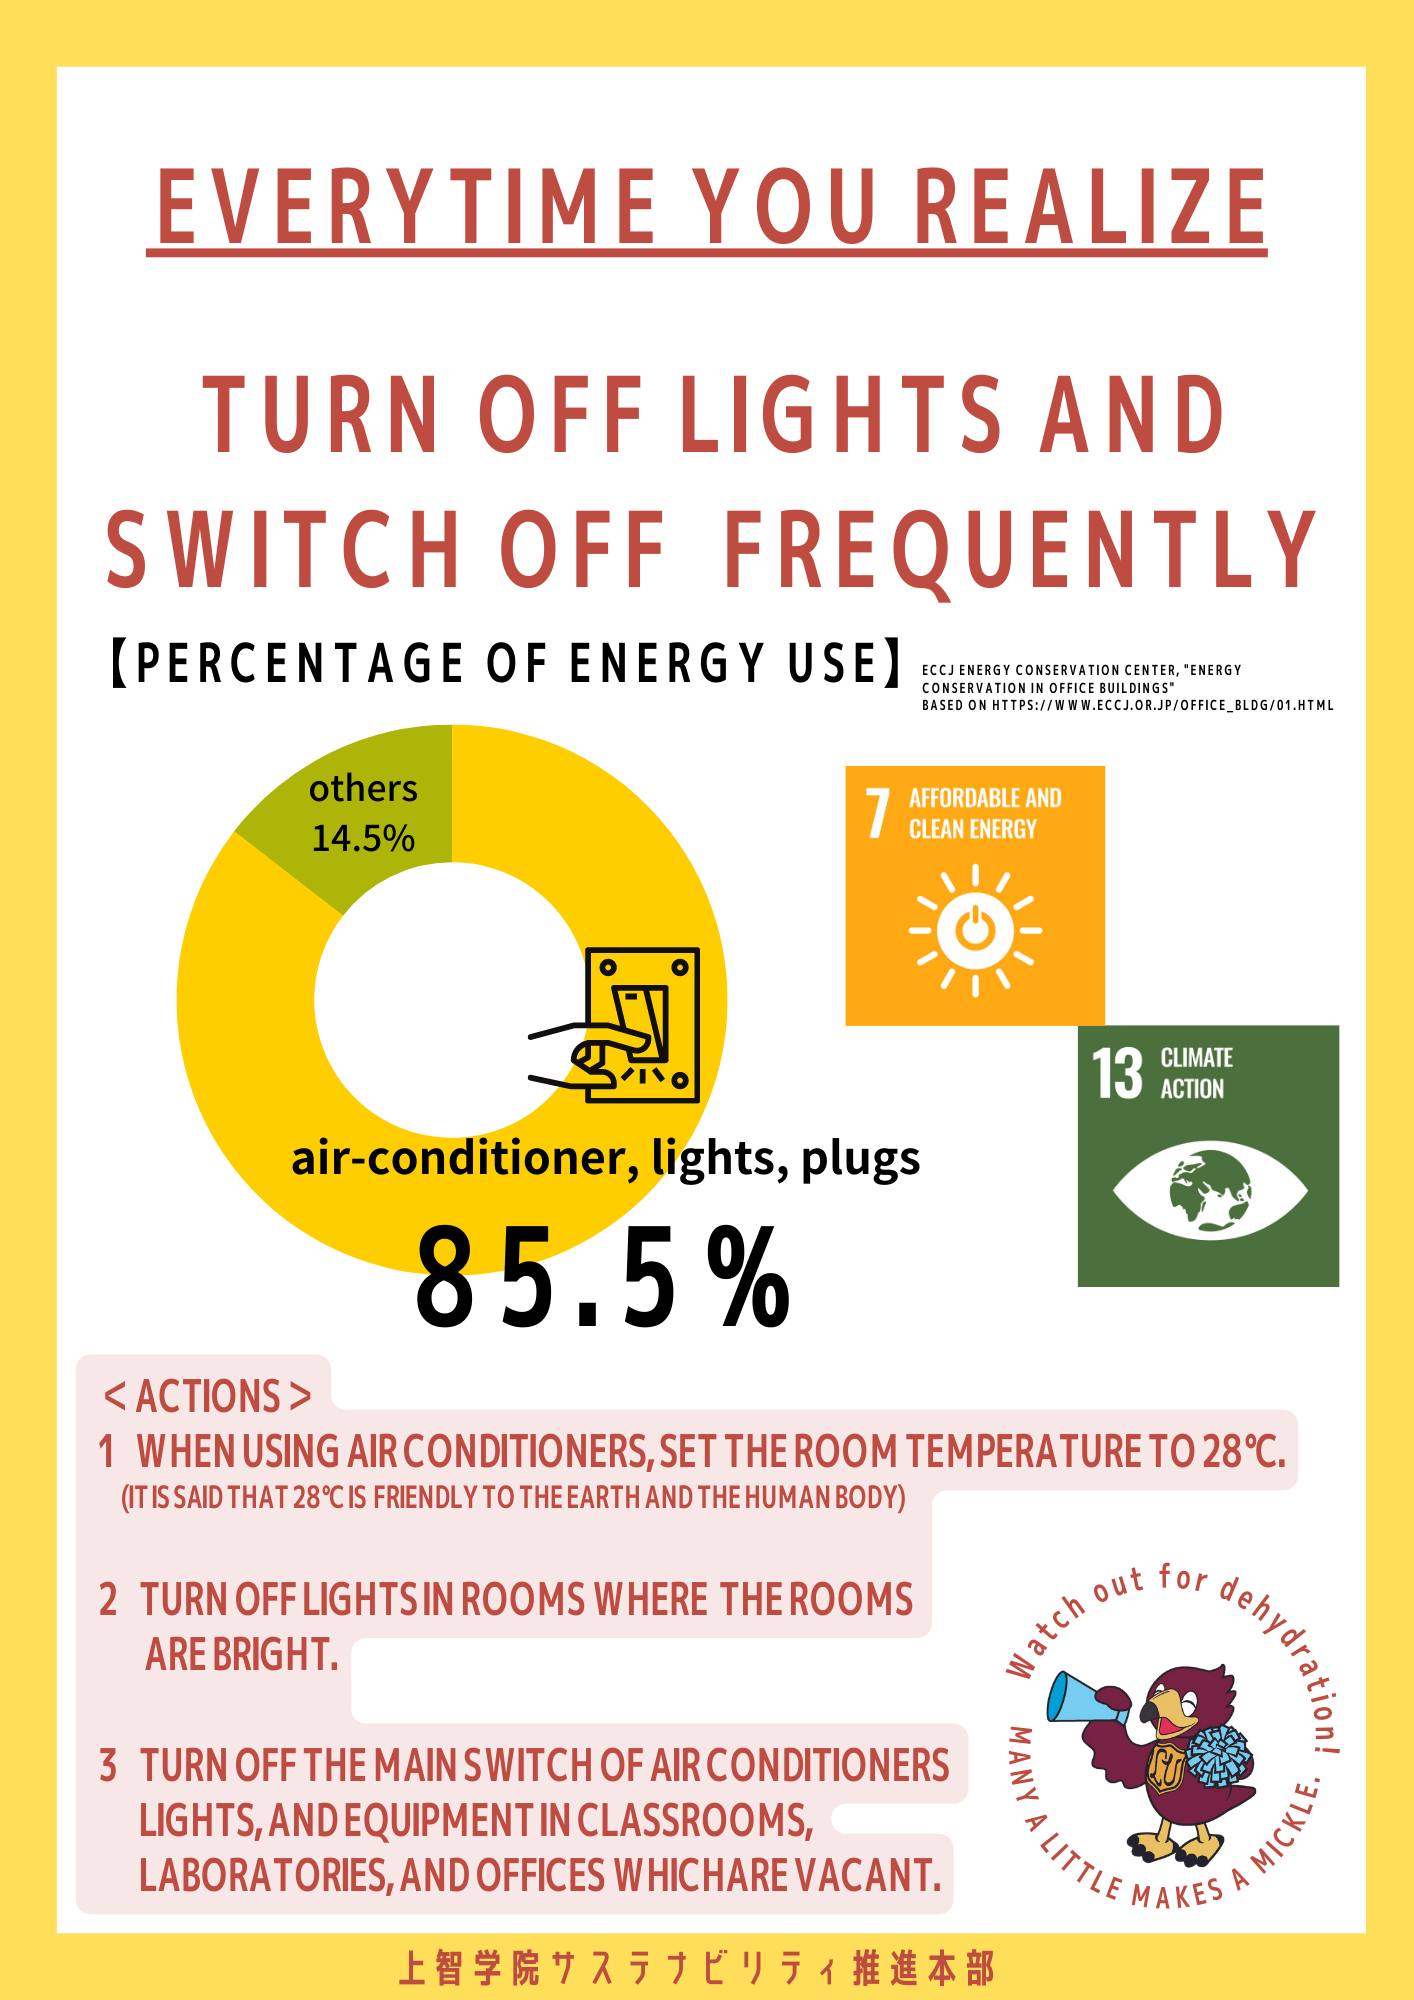 Request for Energy-Saving Actions